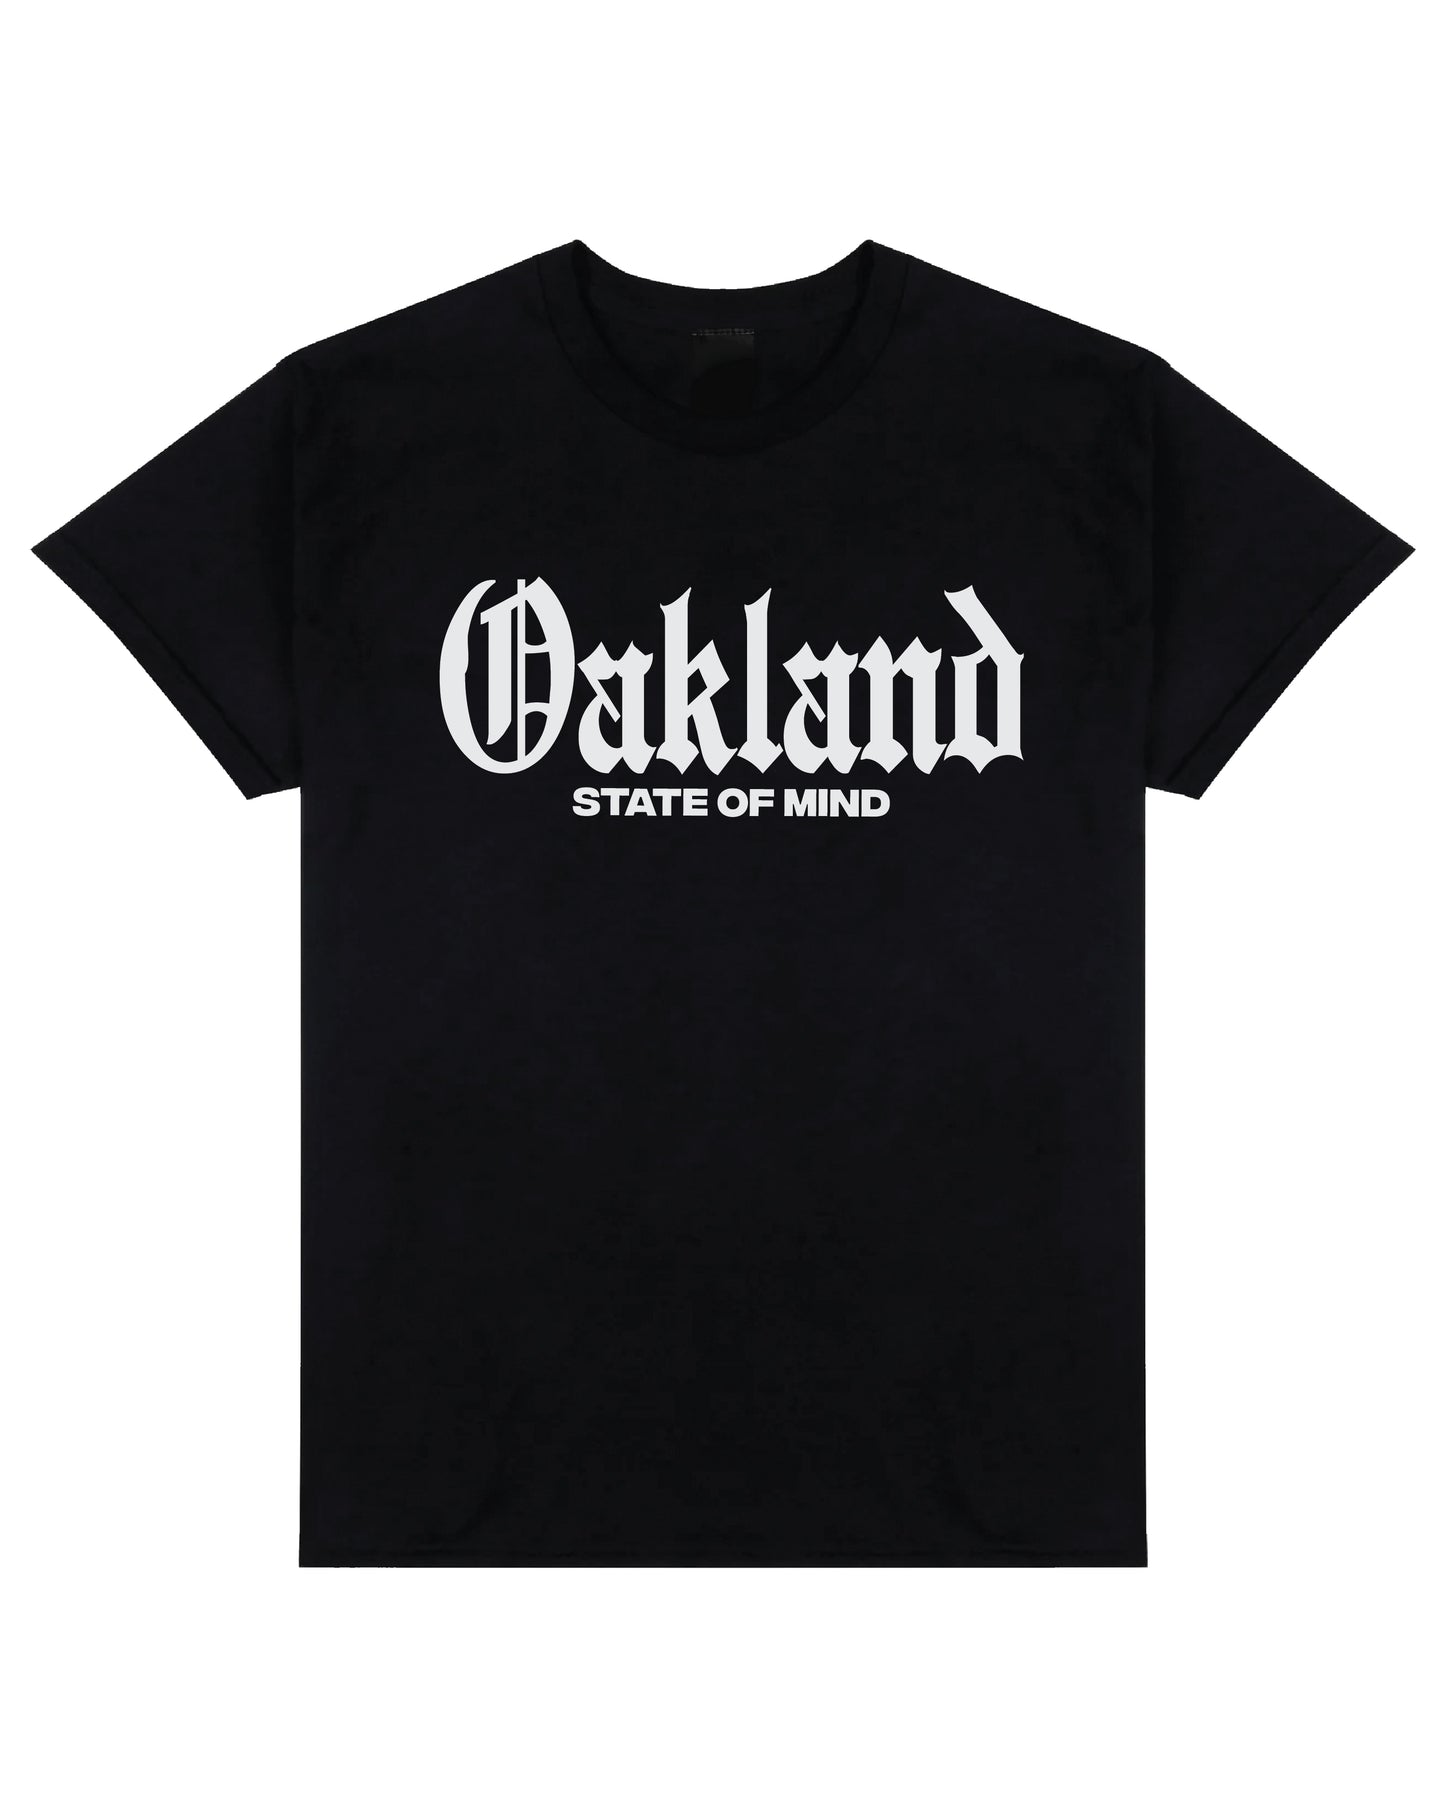 OAKLAND STATE OF MIND "OLD ENGLISH" TEE [LIMITED EDITION]